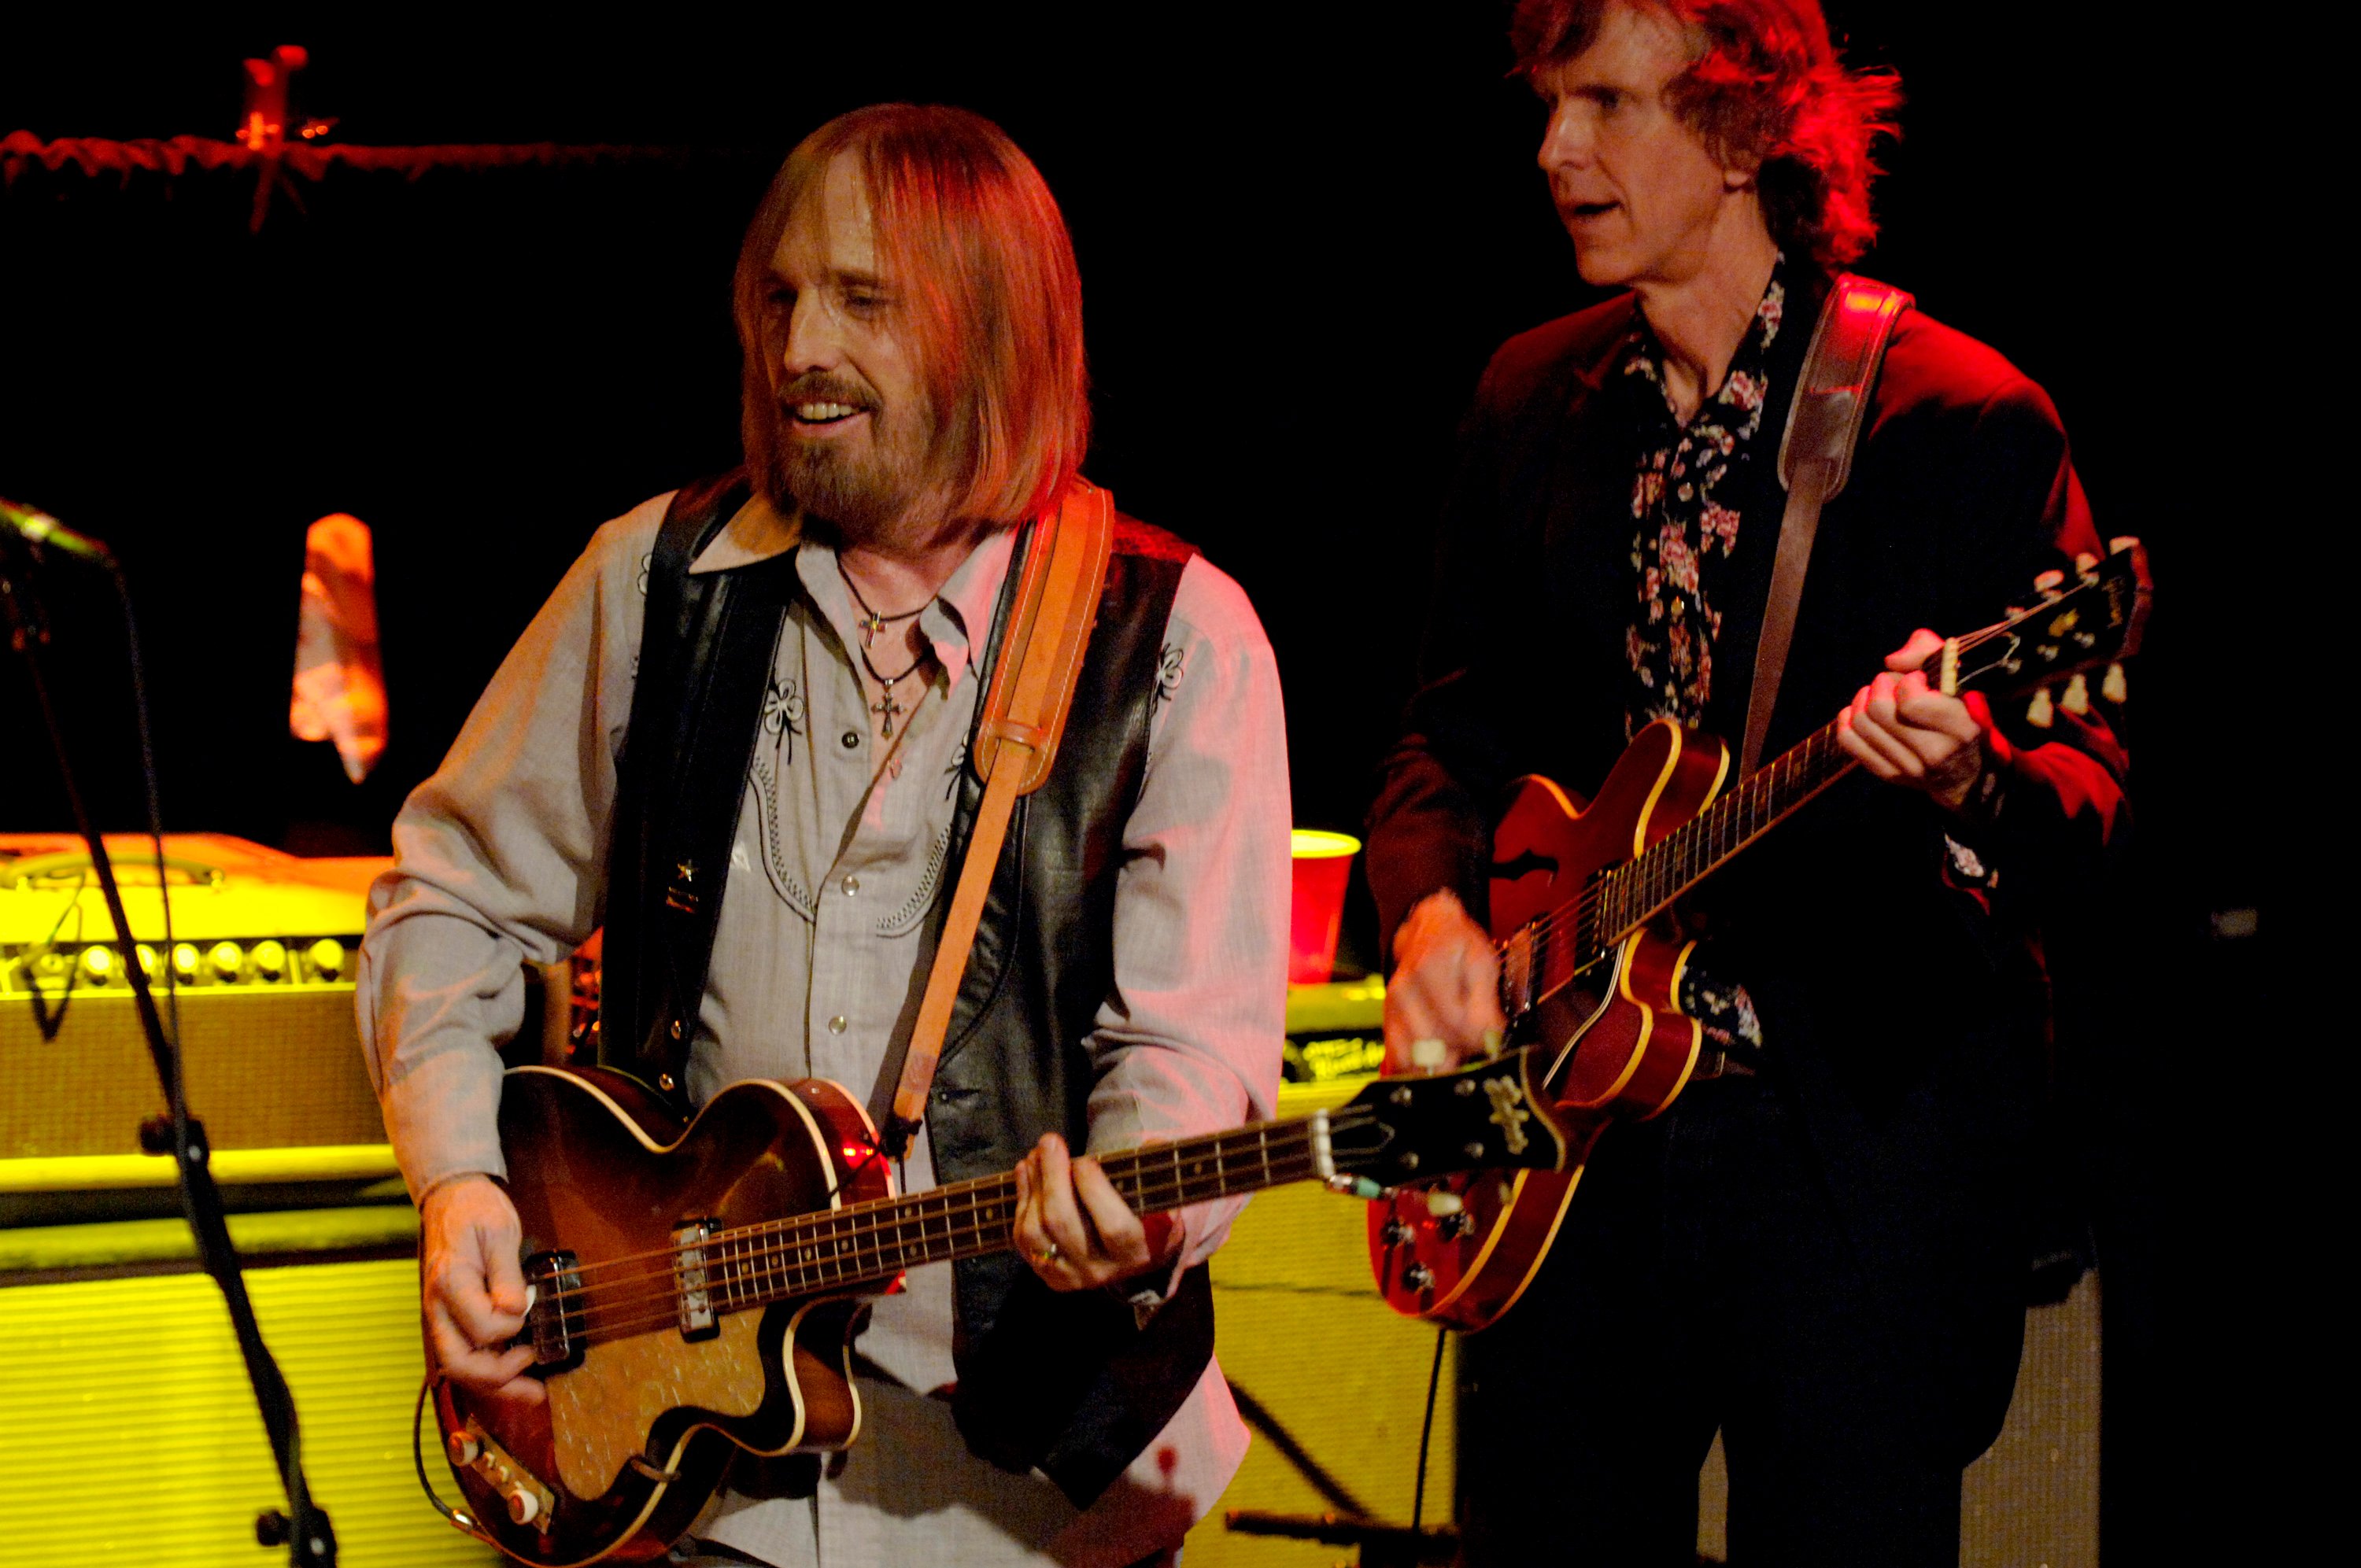 Tom Petty and his friend Tom Leadon play guitar together onstage.